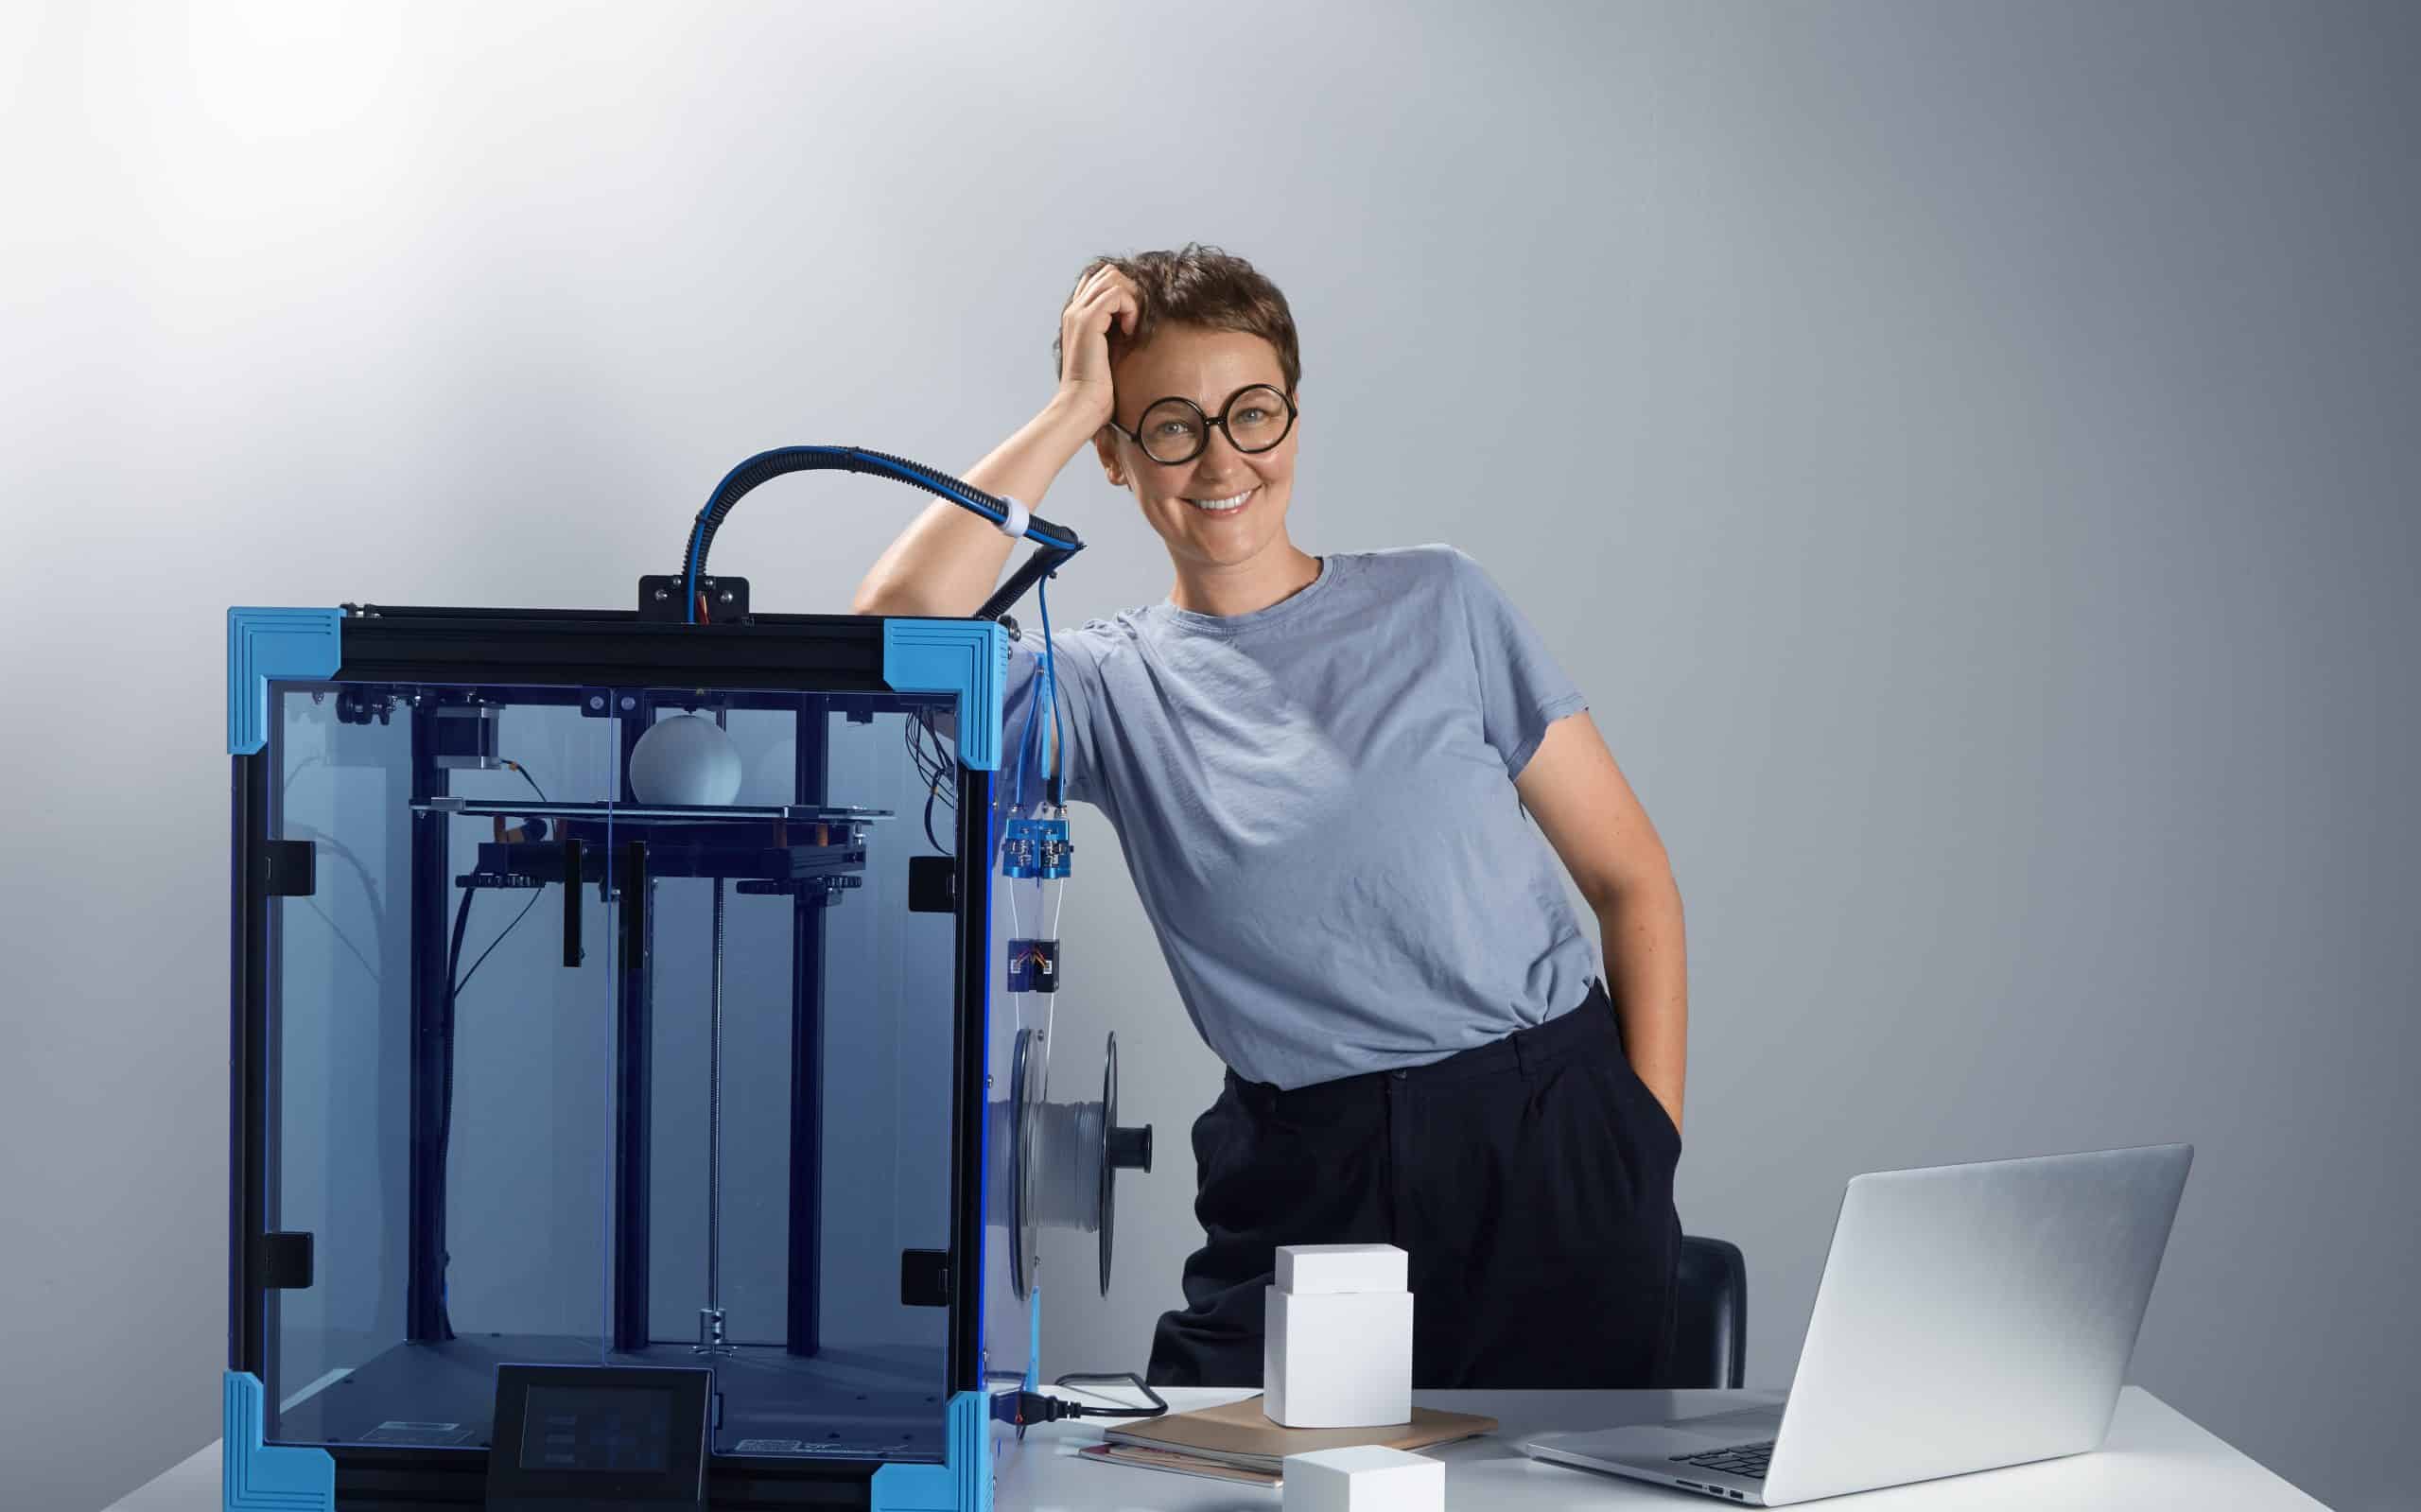 How to Choose the Best 3D Printer for Beginner Needs and Budget